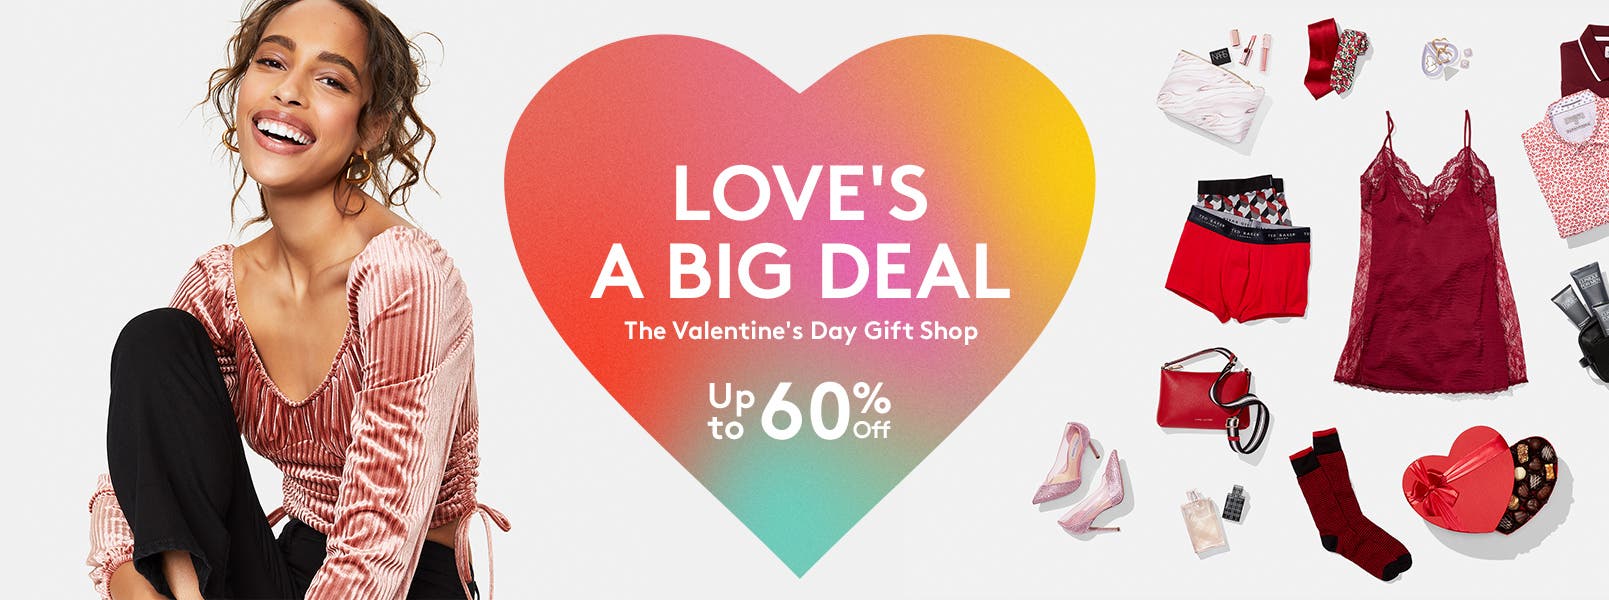 Love's a big deal. The Valentine's Day Gift Shop. Up to sixty percent off.